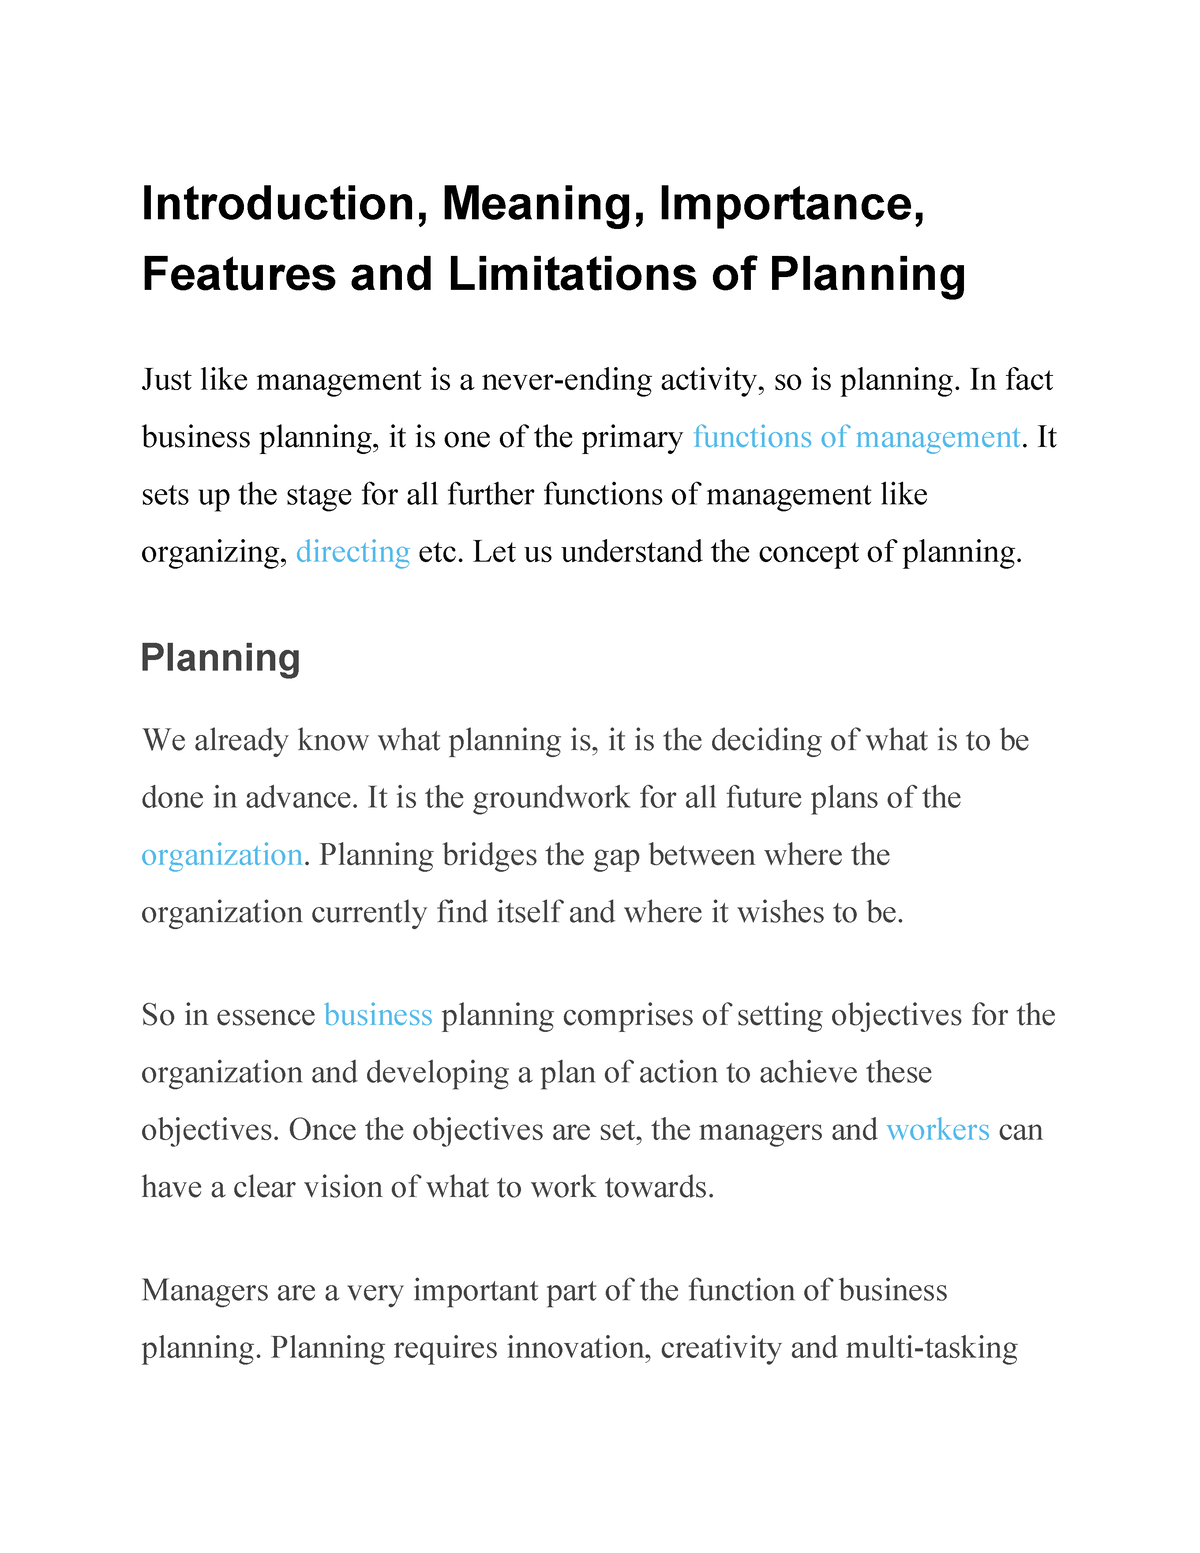 Planning – Definition, Characteristics, Limitations, Process and FAQs